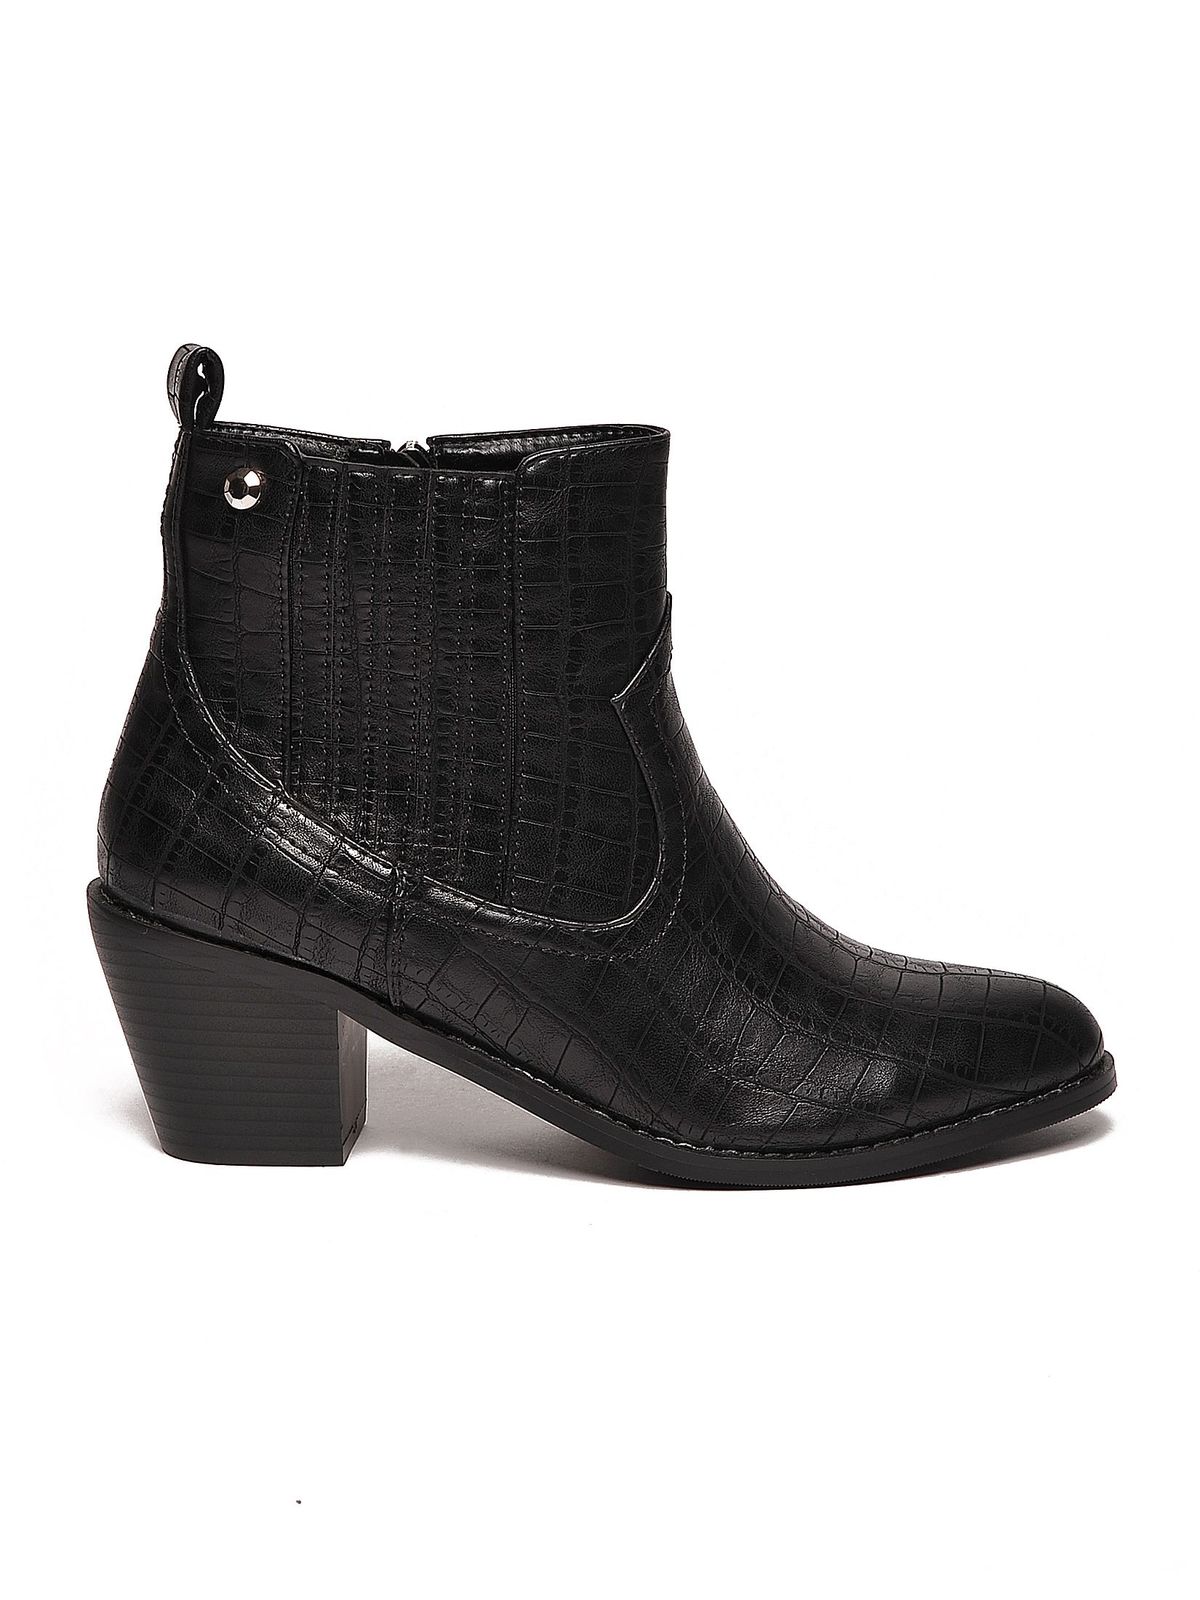 Top Secret black ankle boots from ecological leather chunky heel